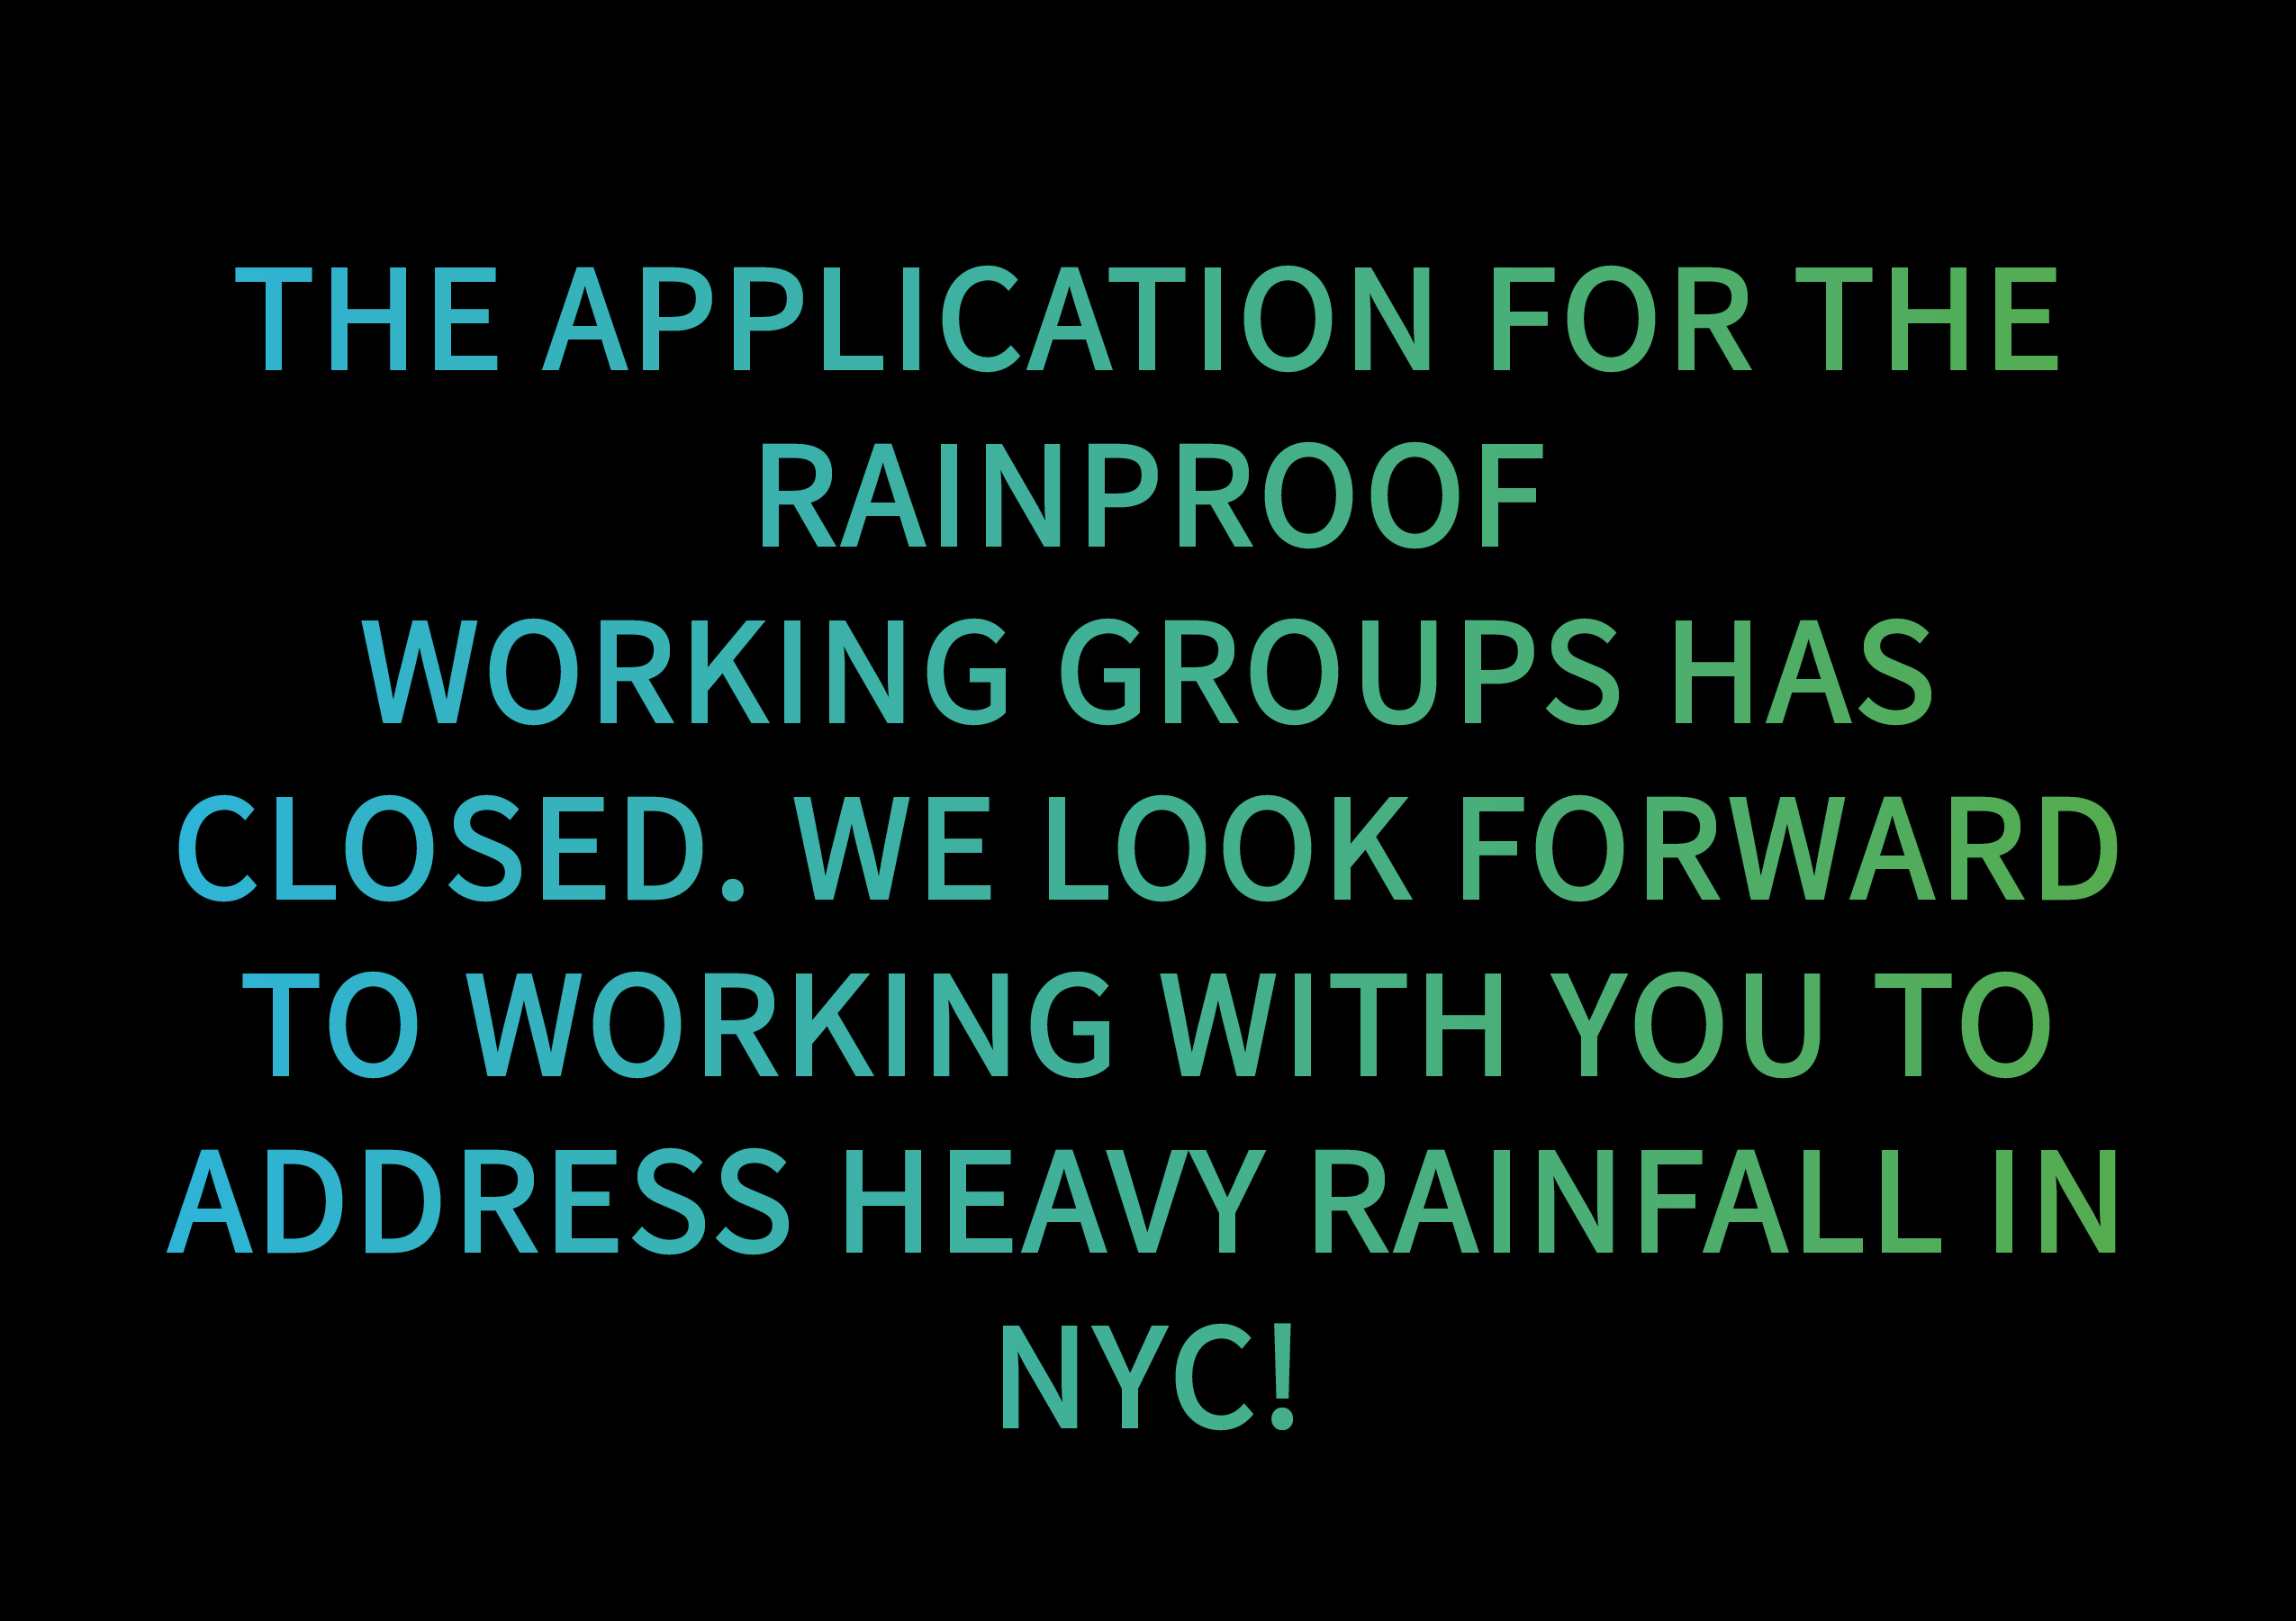 Join Us in Rainproofing NYC – Rebuild by Design